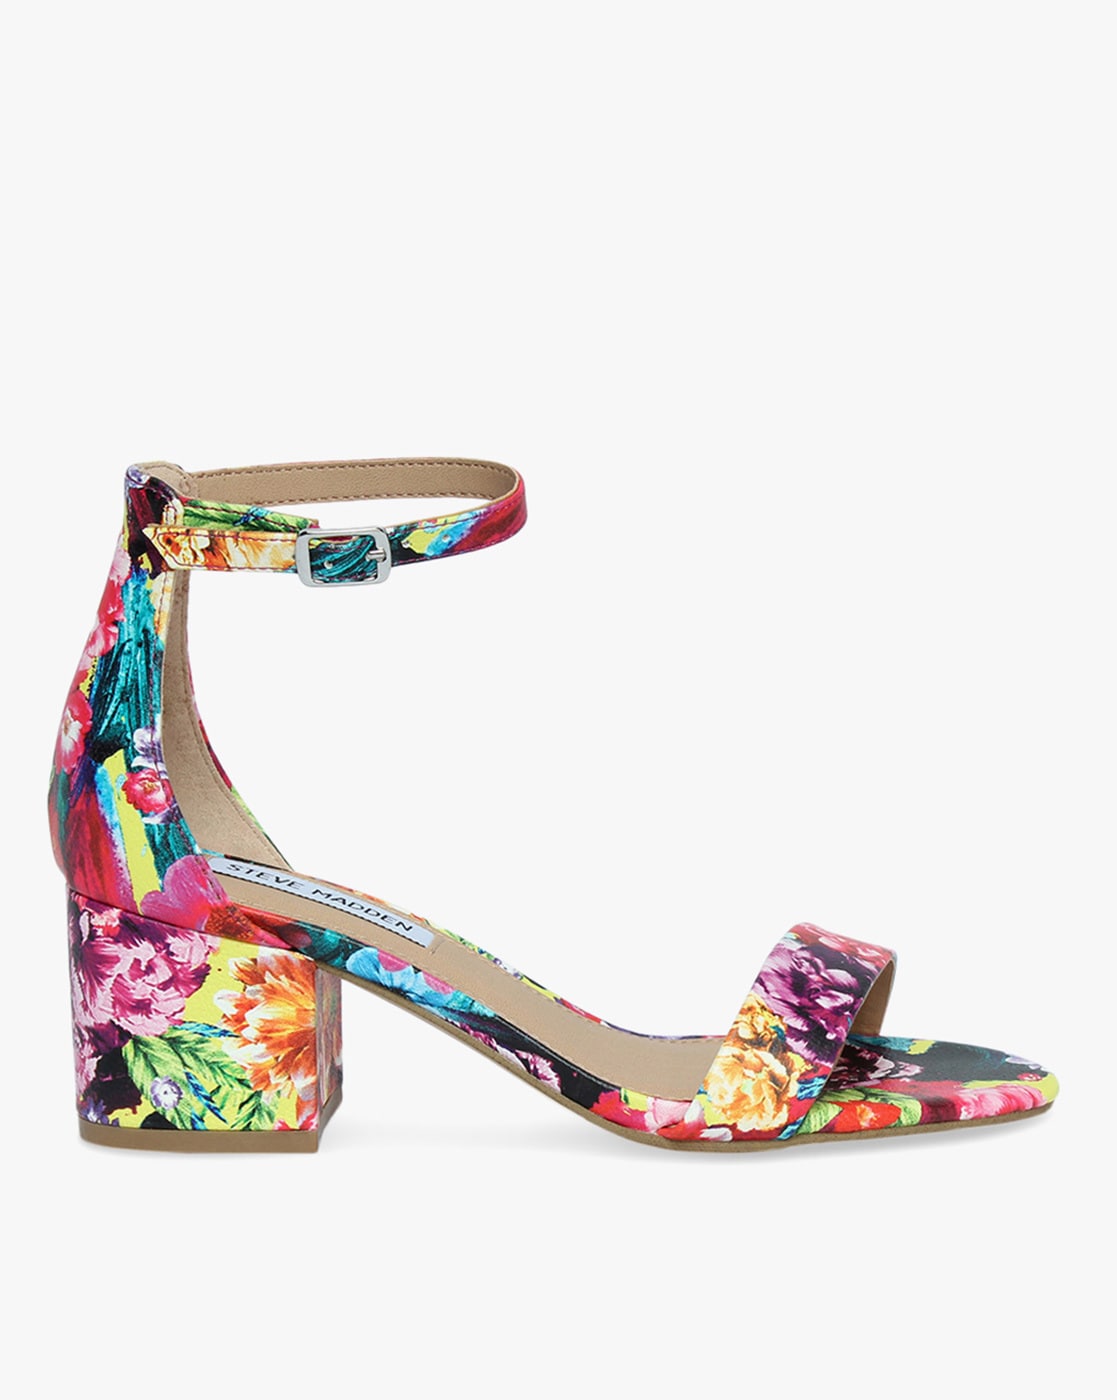 Buy Multicolour Heeled Sandals for 